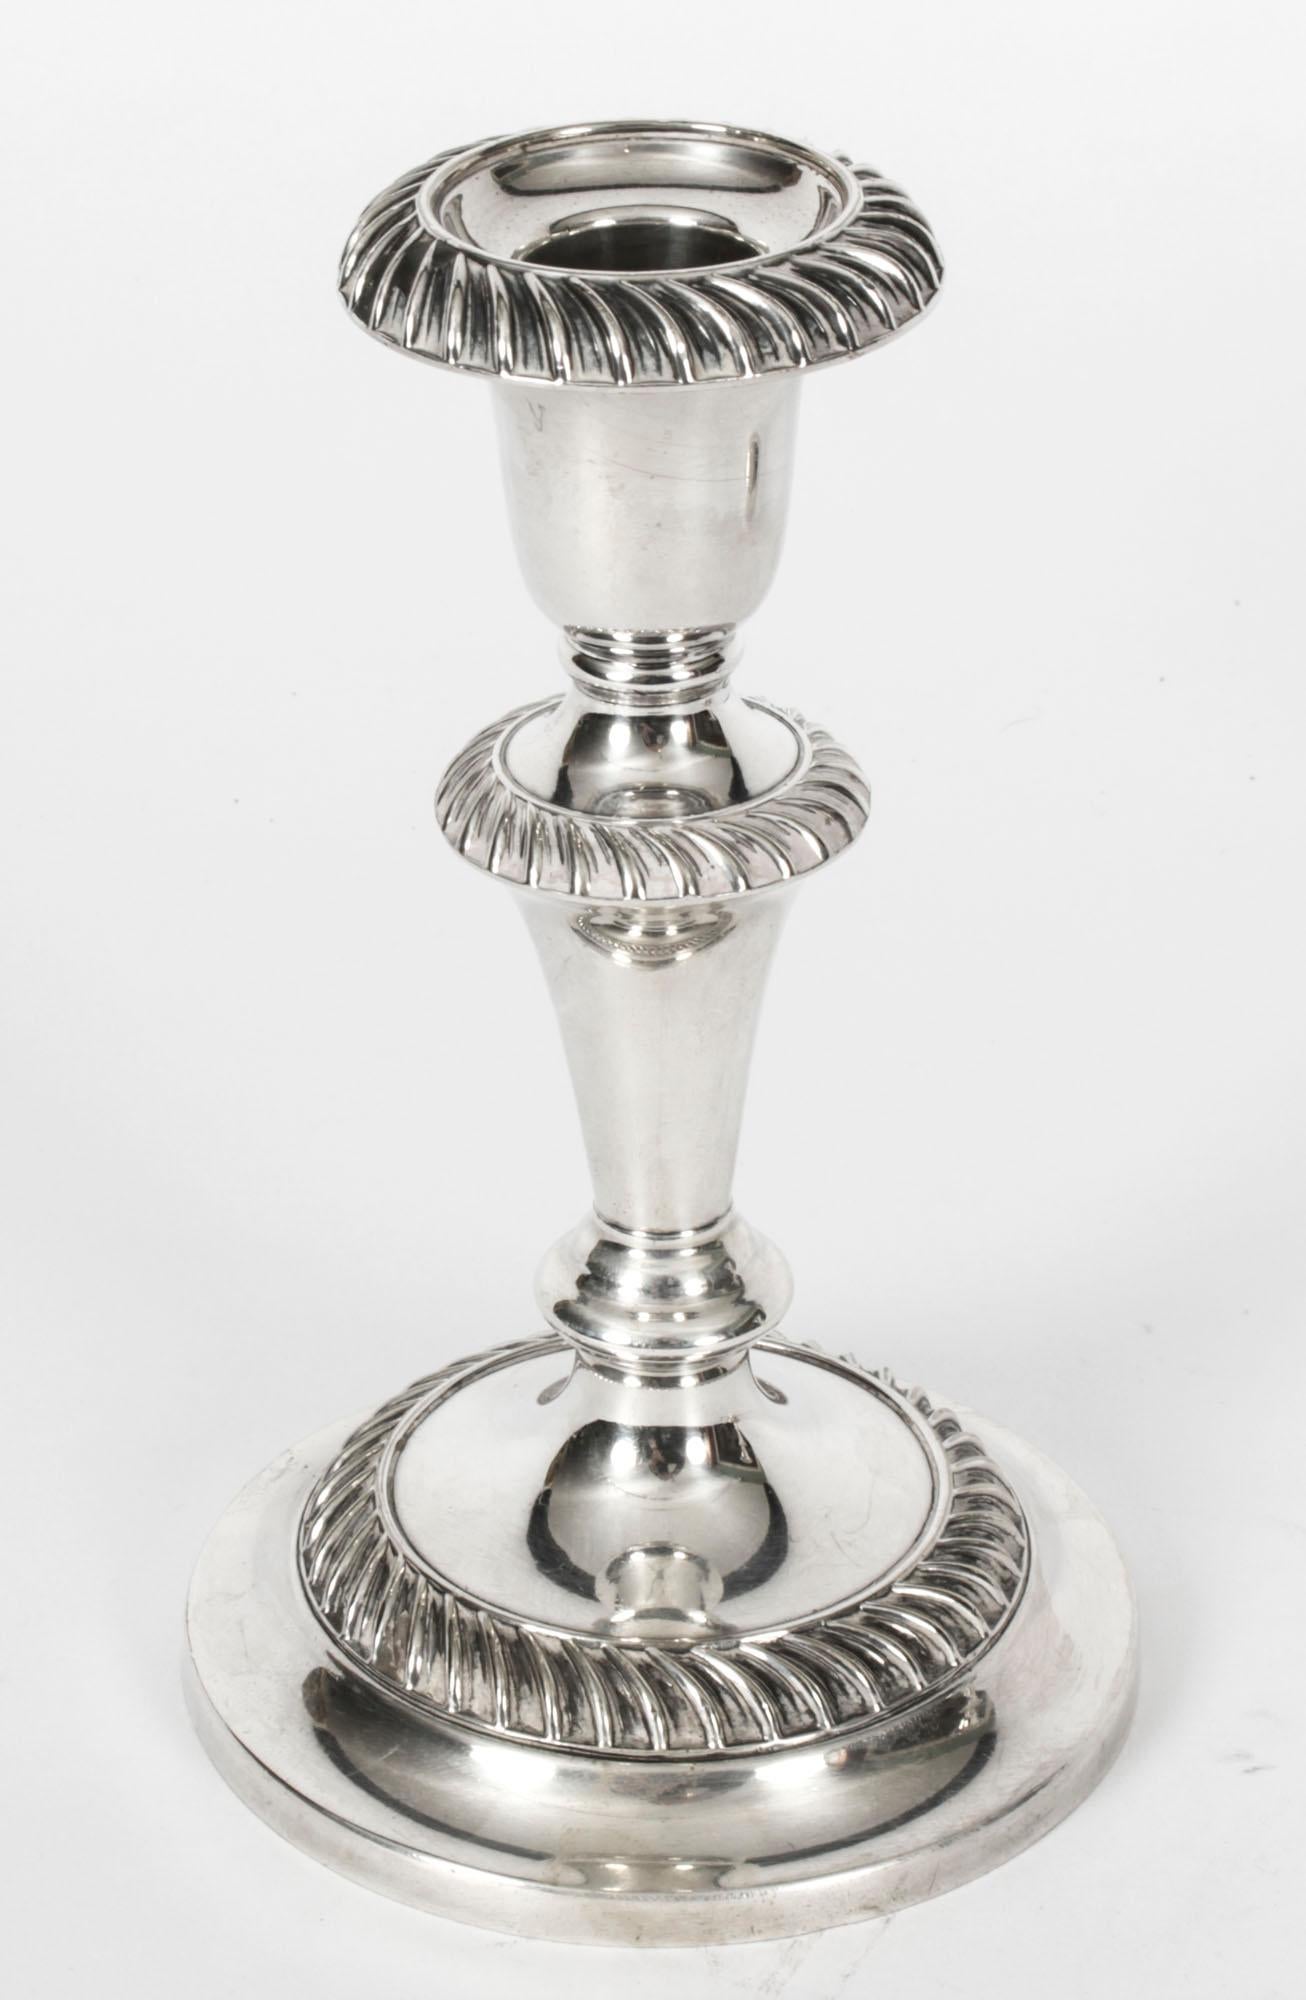 A fabulous pair of antique Edwardian silver plated candlesticks bearing the makers mark S.L into a shield, for Sydney Latimer, Circa 1910 in date.

Of fabulous quality, made of silver on copper, with wonderful embossed decoration.

There is no